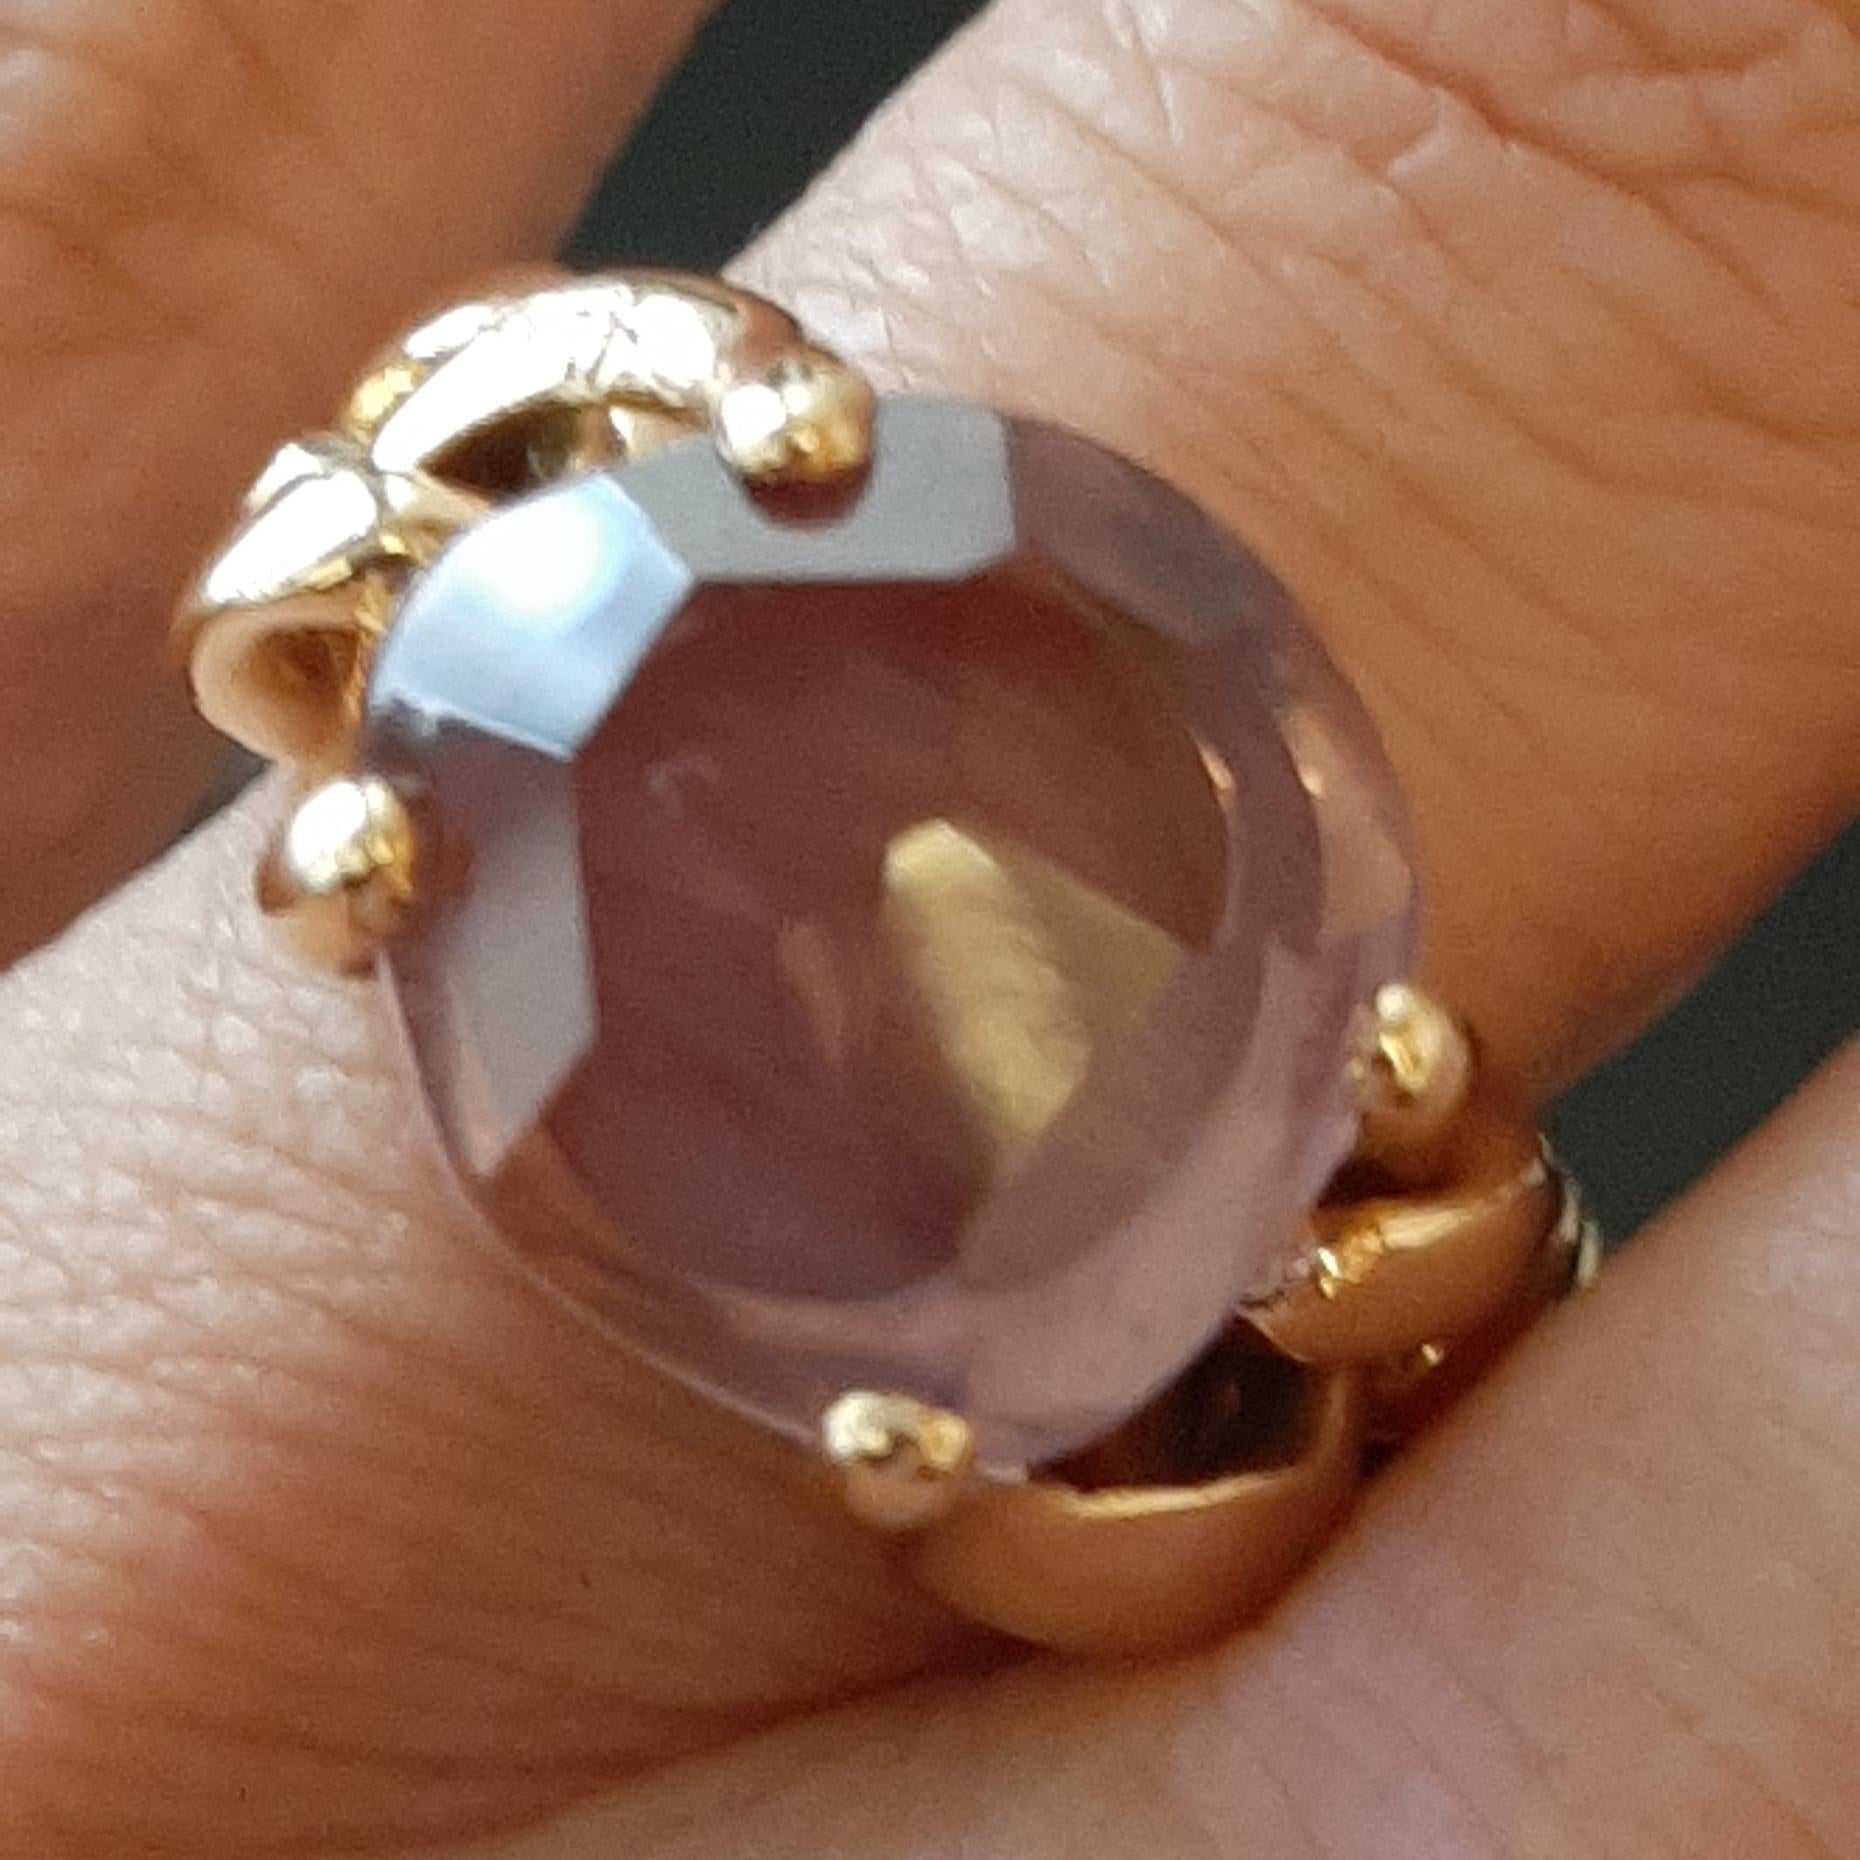 Pomellato Lola Collection Amethyst in 18 Karat Rose Gold Ring.
Marked Pomellato.
Original Price: €4,070

With creativity and character in the international panorama of jewelry, the Pomellato brand was born in 1967 resulting from the intuition of its